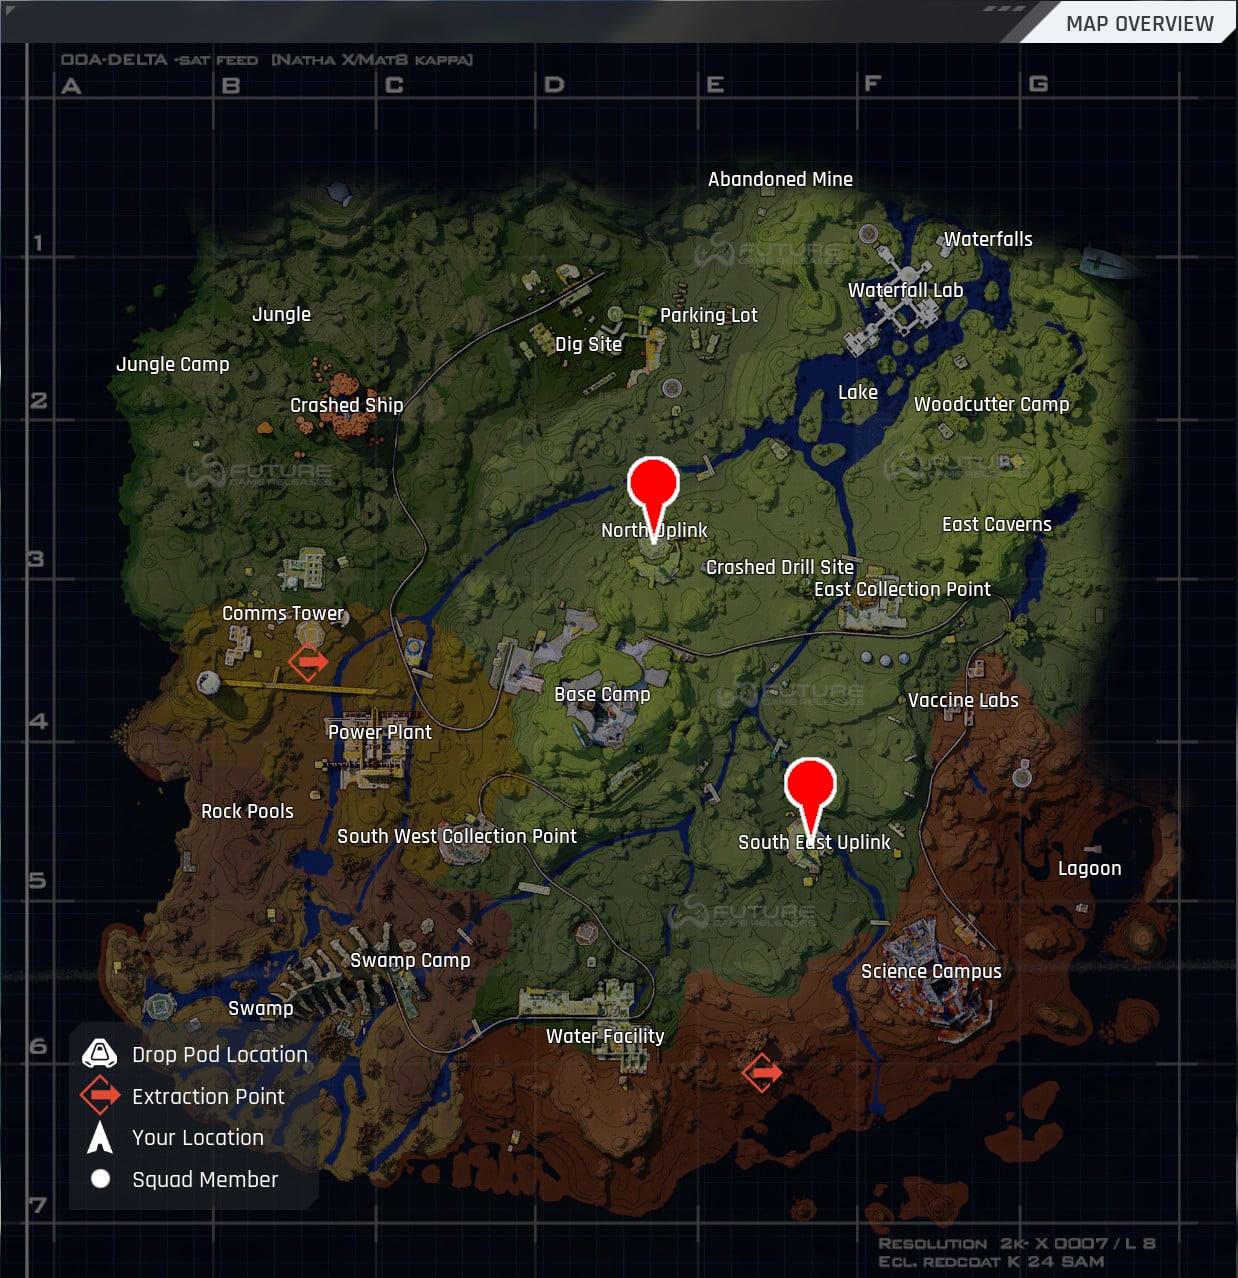 North and Southeast Uplink Map Location